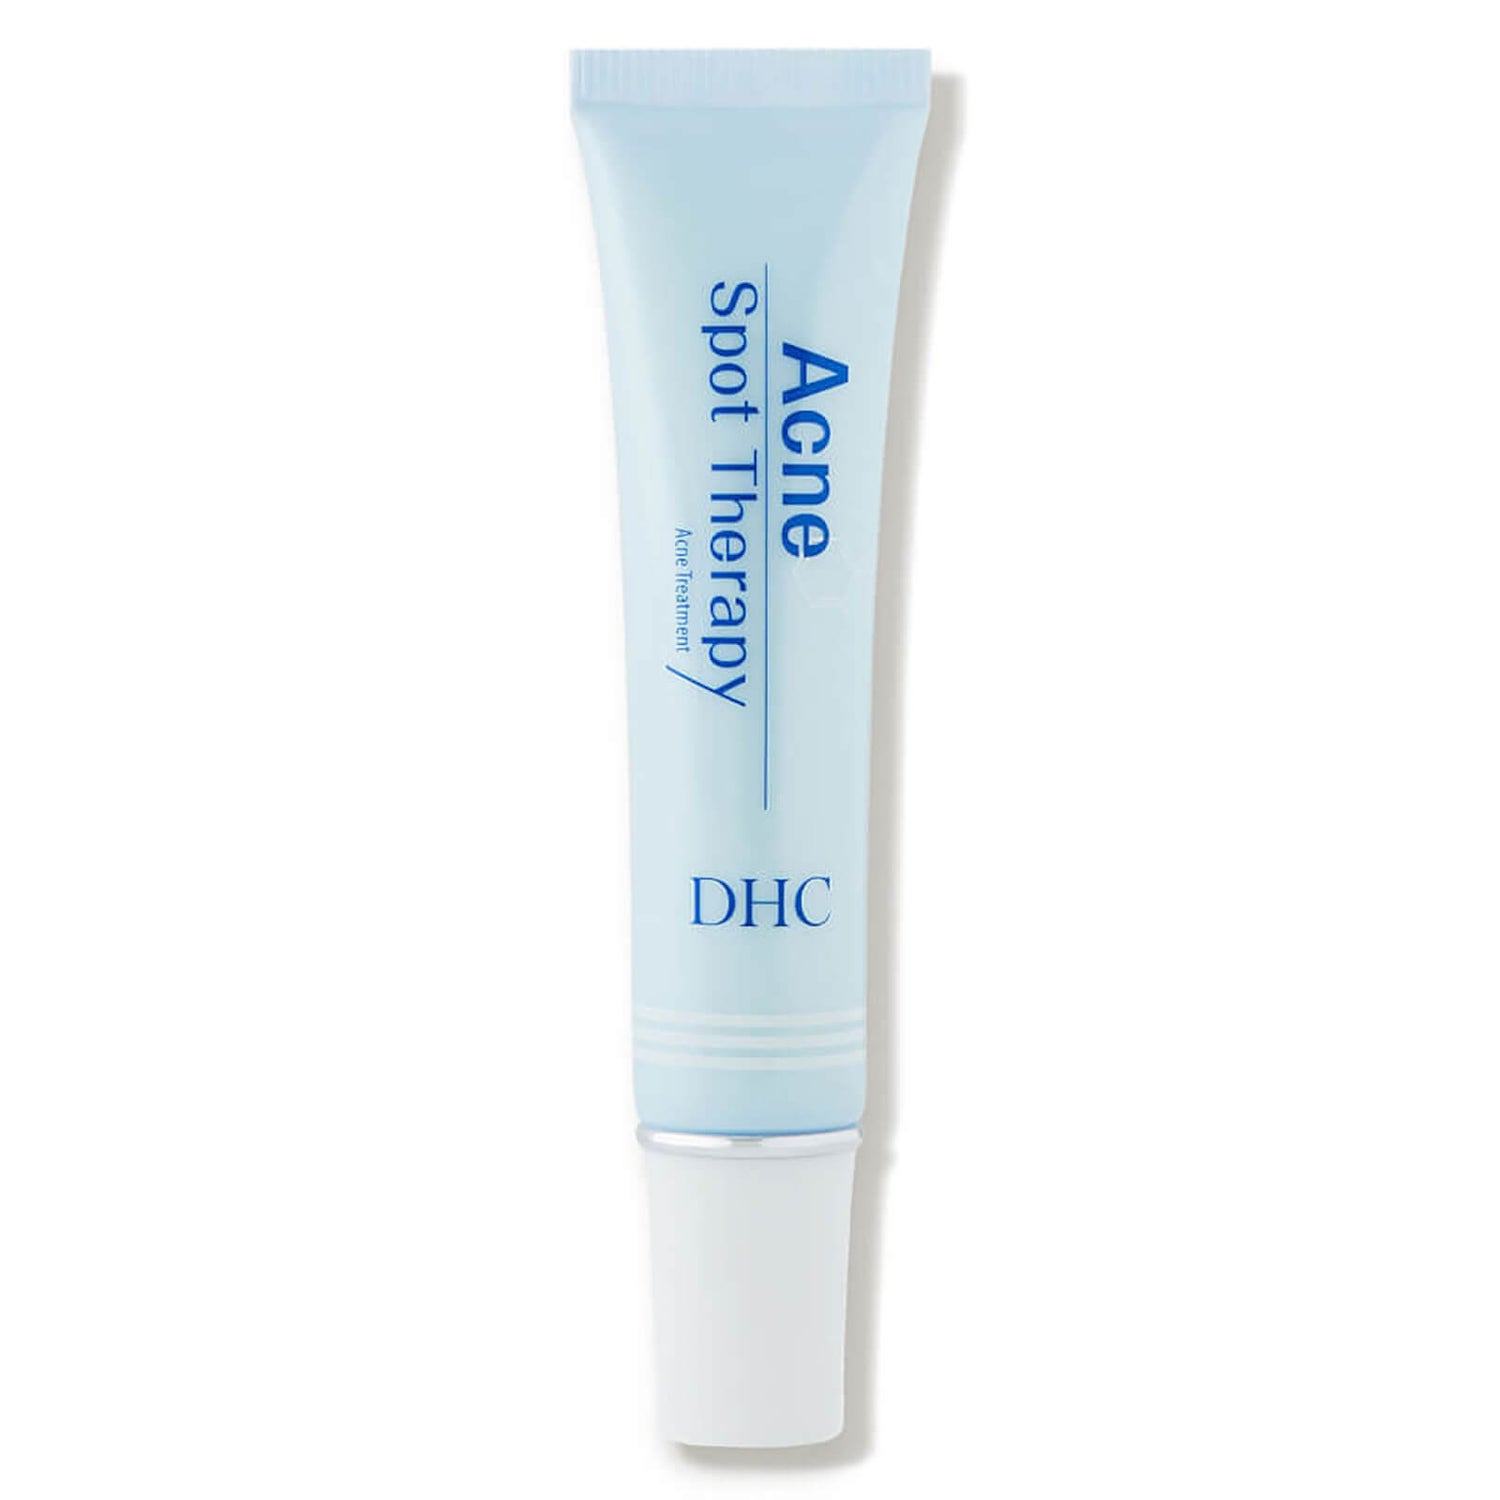 DHC Acne Spot Therapy (0.52 oz.)